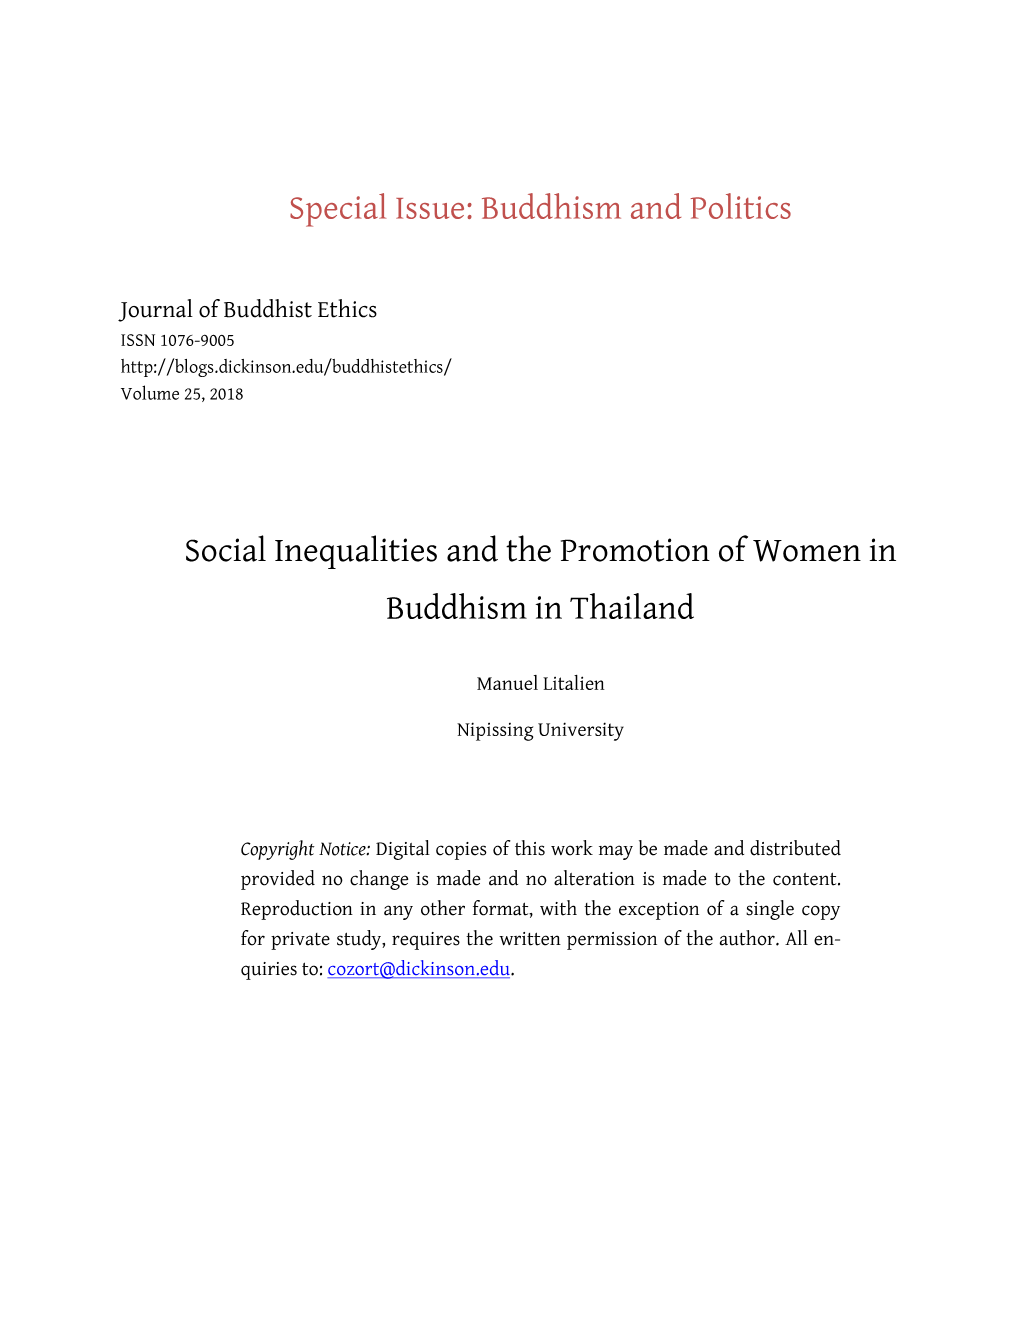 Special Issue: Buddhism and Politics Social Inequalities and The